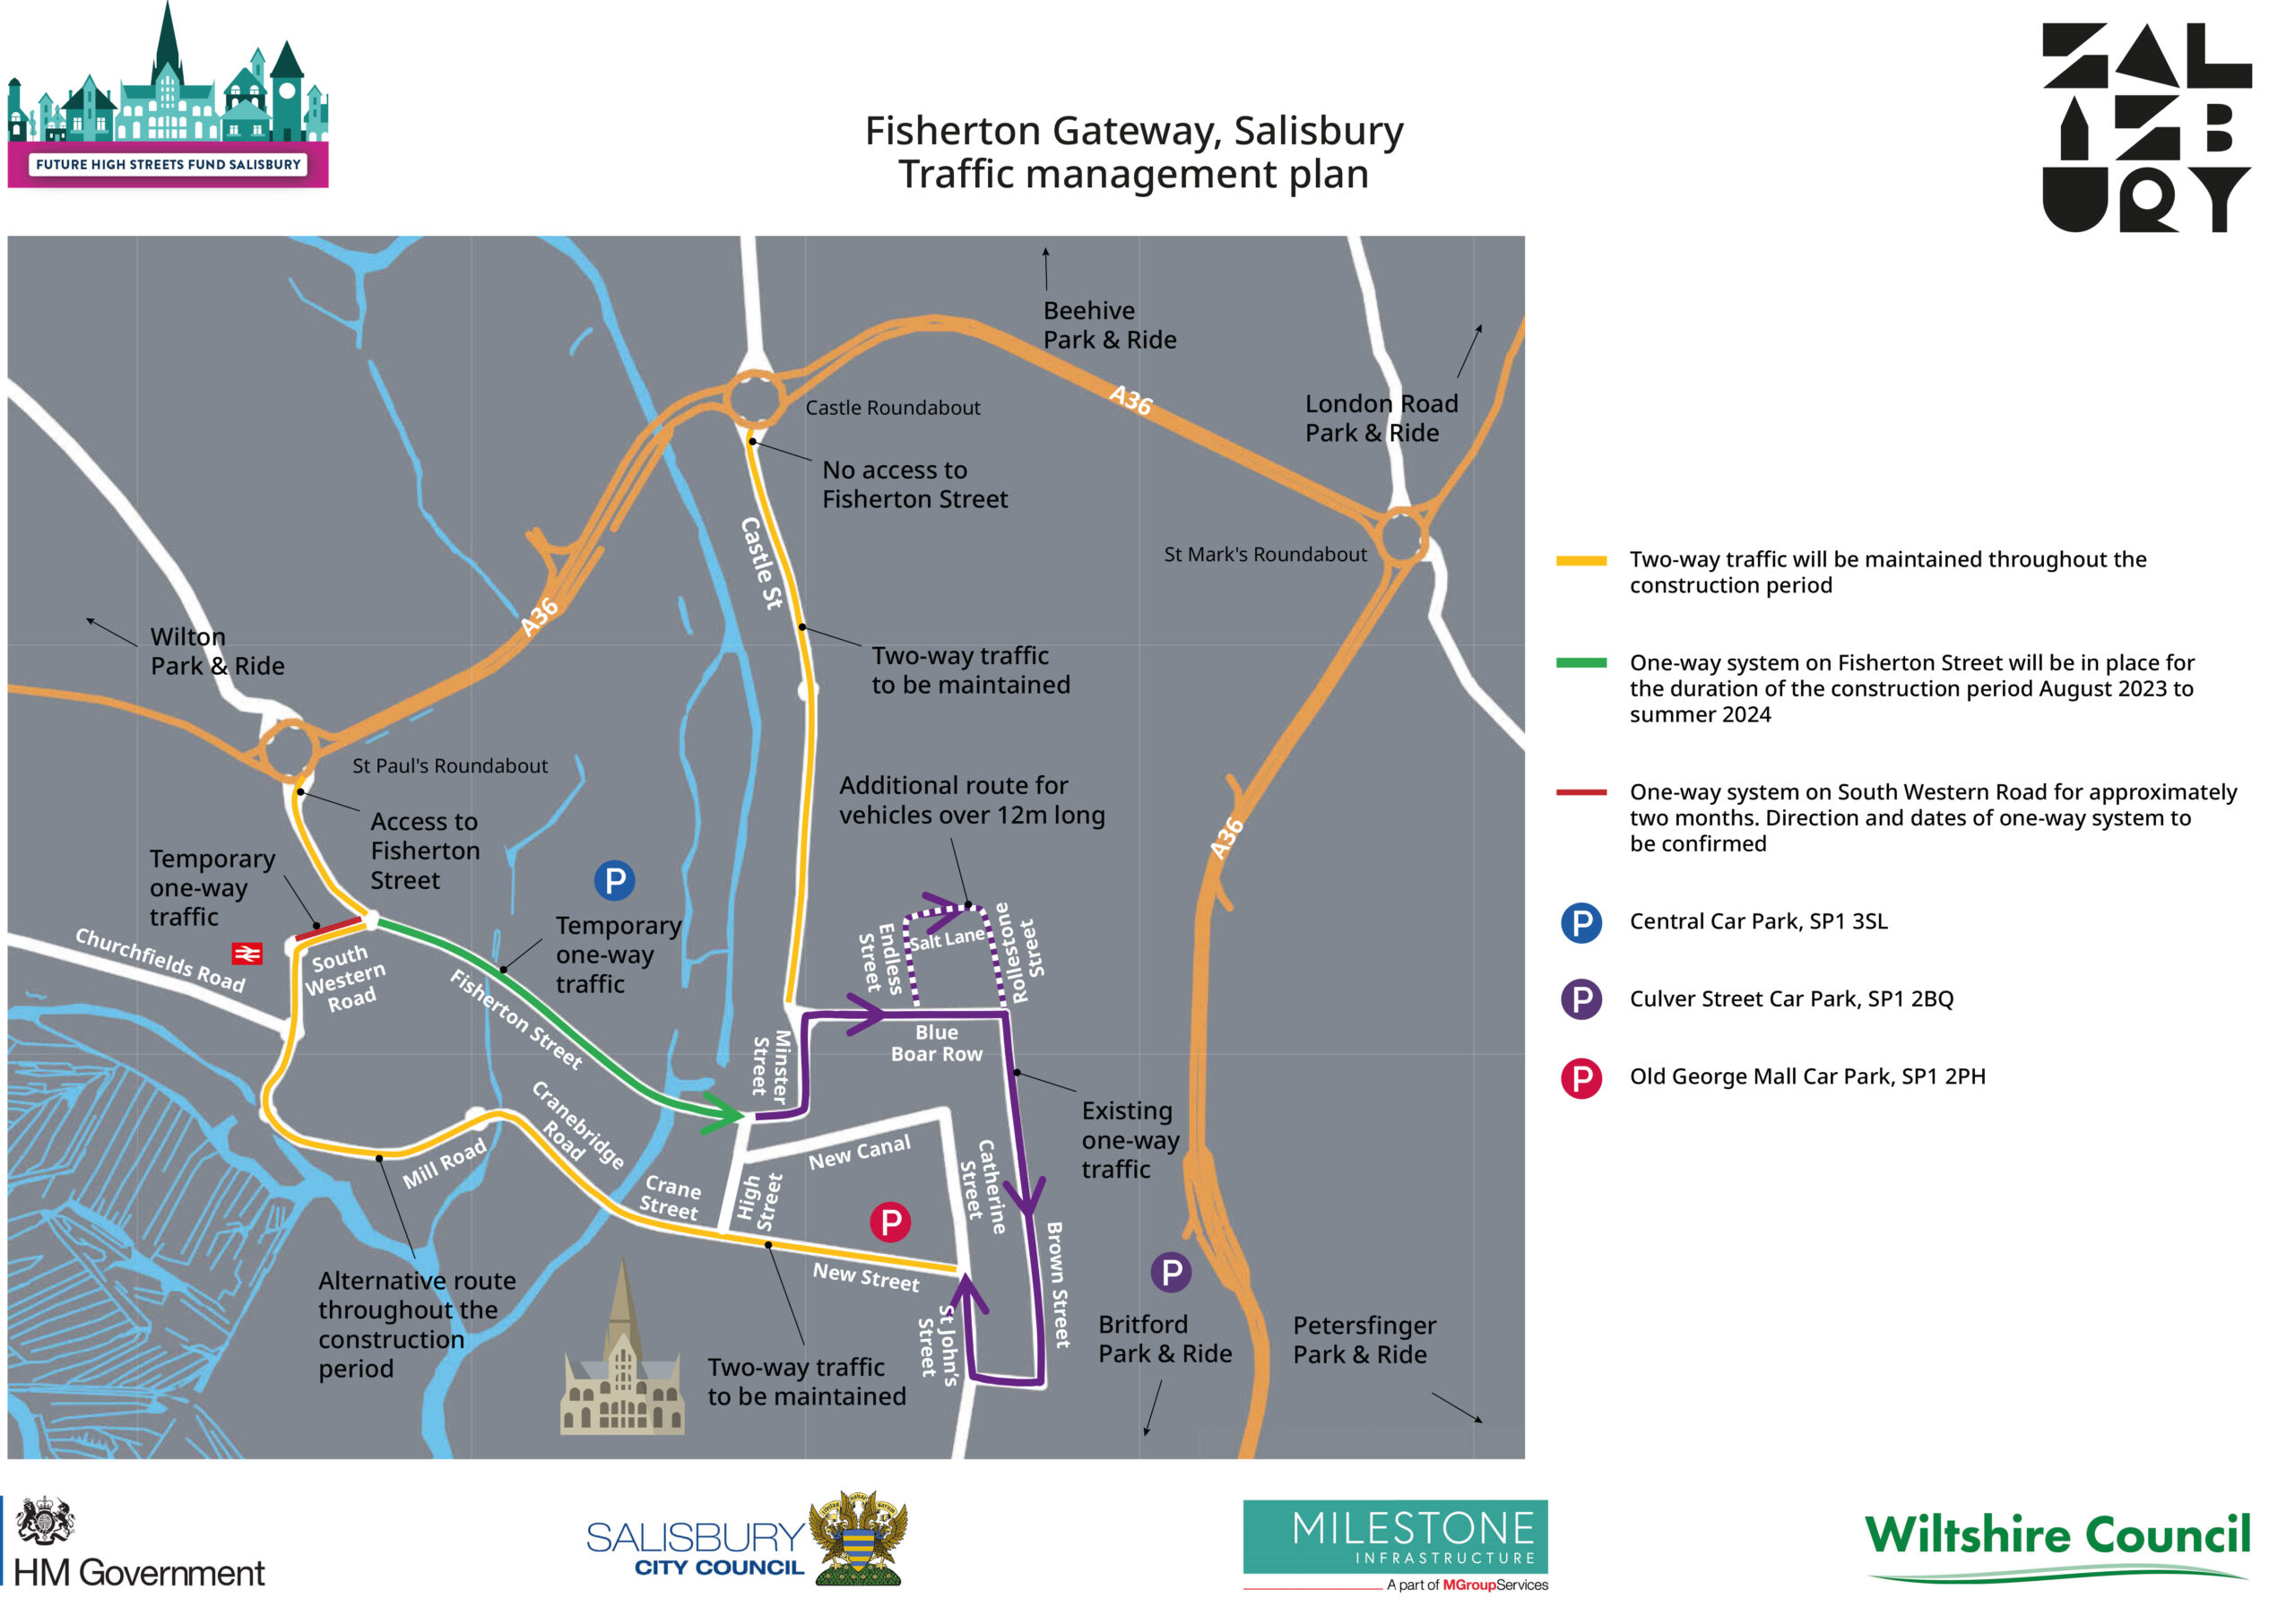 Traffic management during the Fisherton Gateway works. Picture: Wiltshire Council